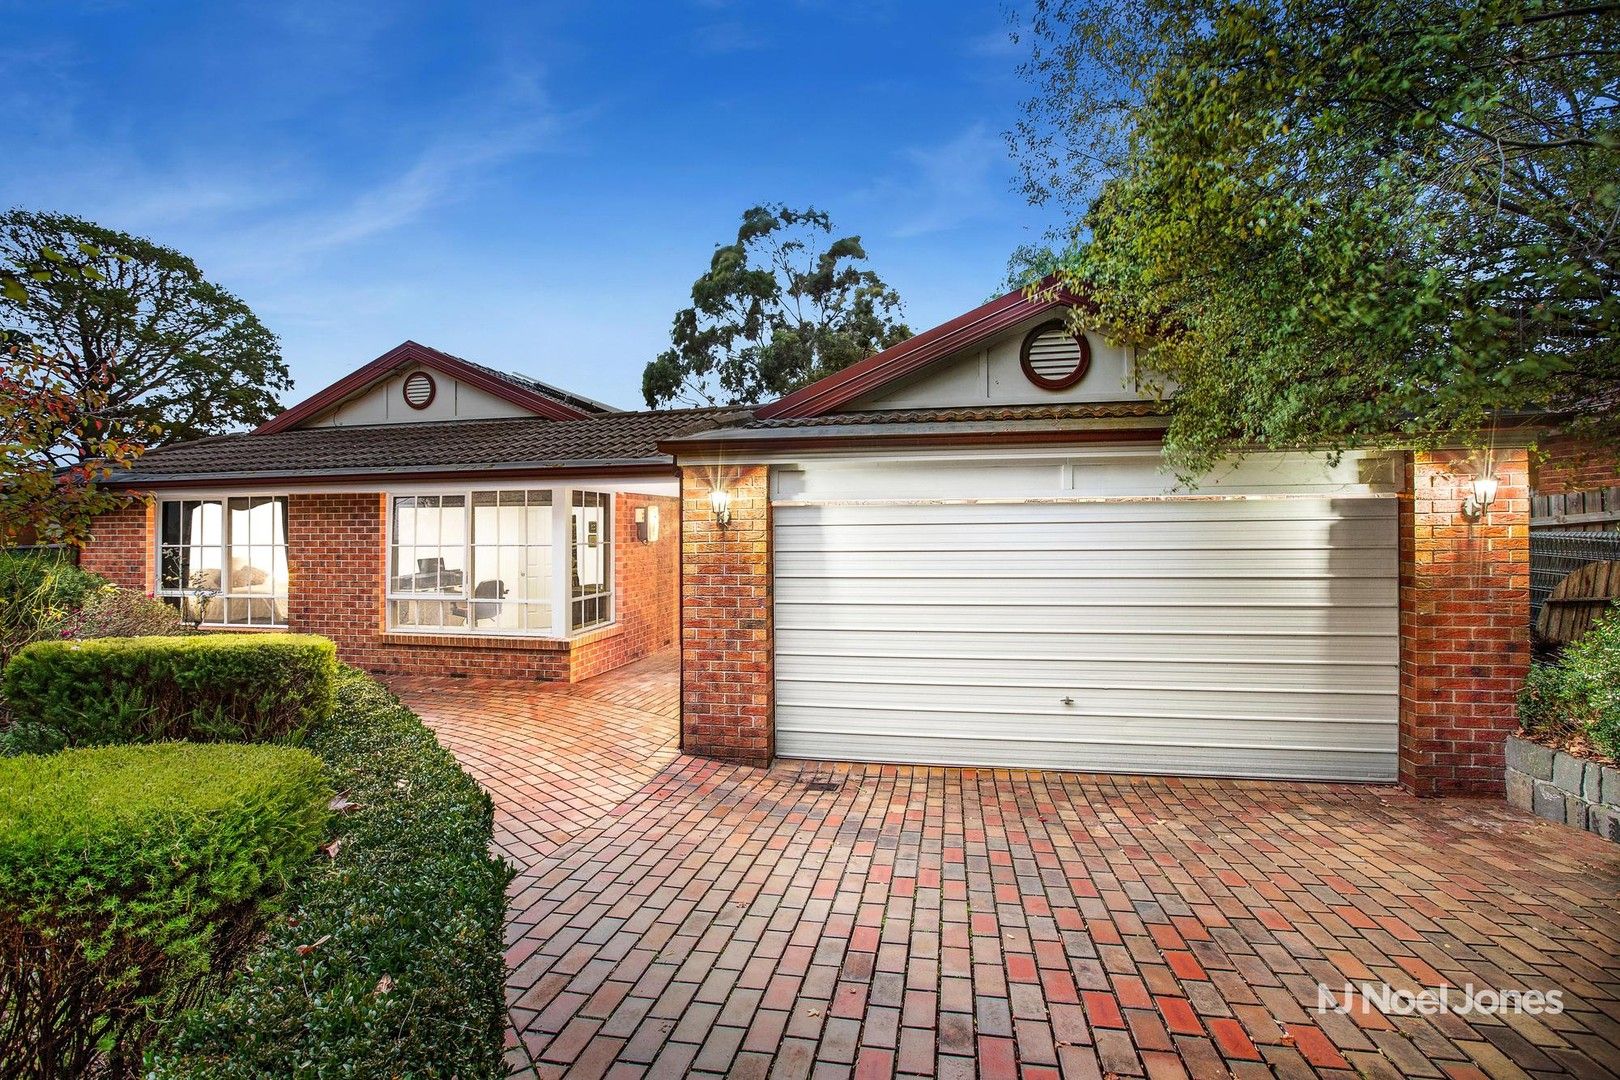 4 bedrooms House in 37 Wonga Road RINGWOOD NORTH VIC, 3134